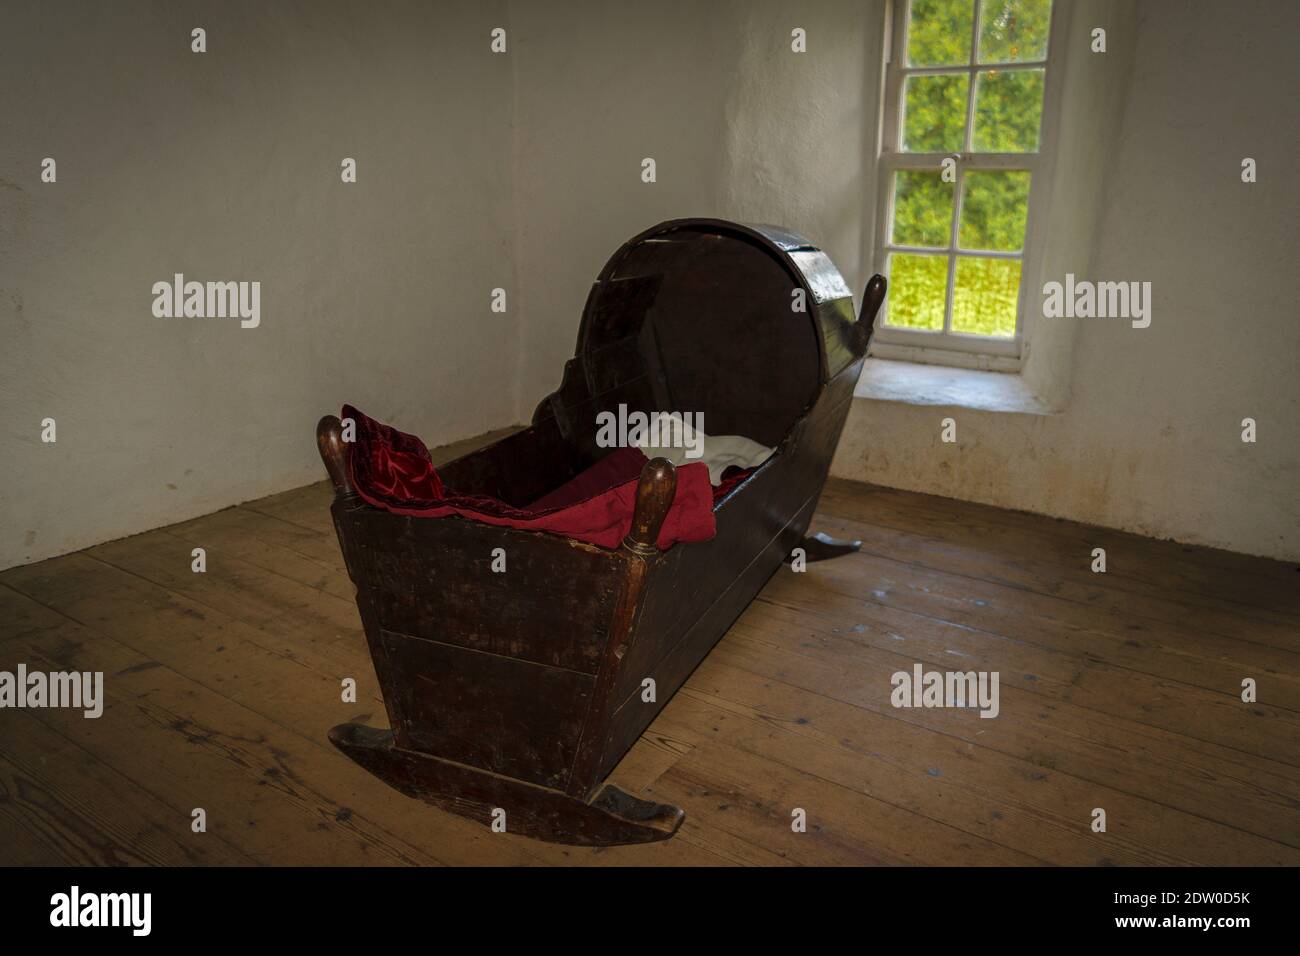 Wooden vintage antique rocking baby bed with the red blanket, in empty dark room with window and wooden floor Stock Photo